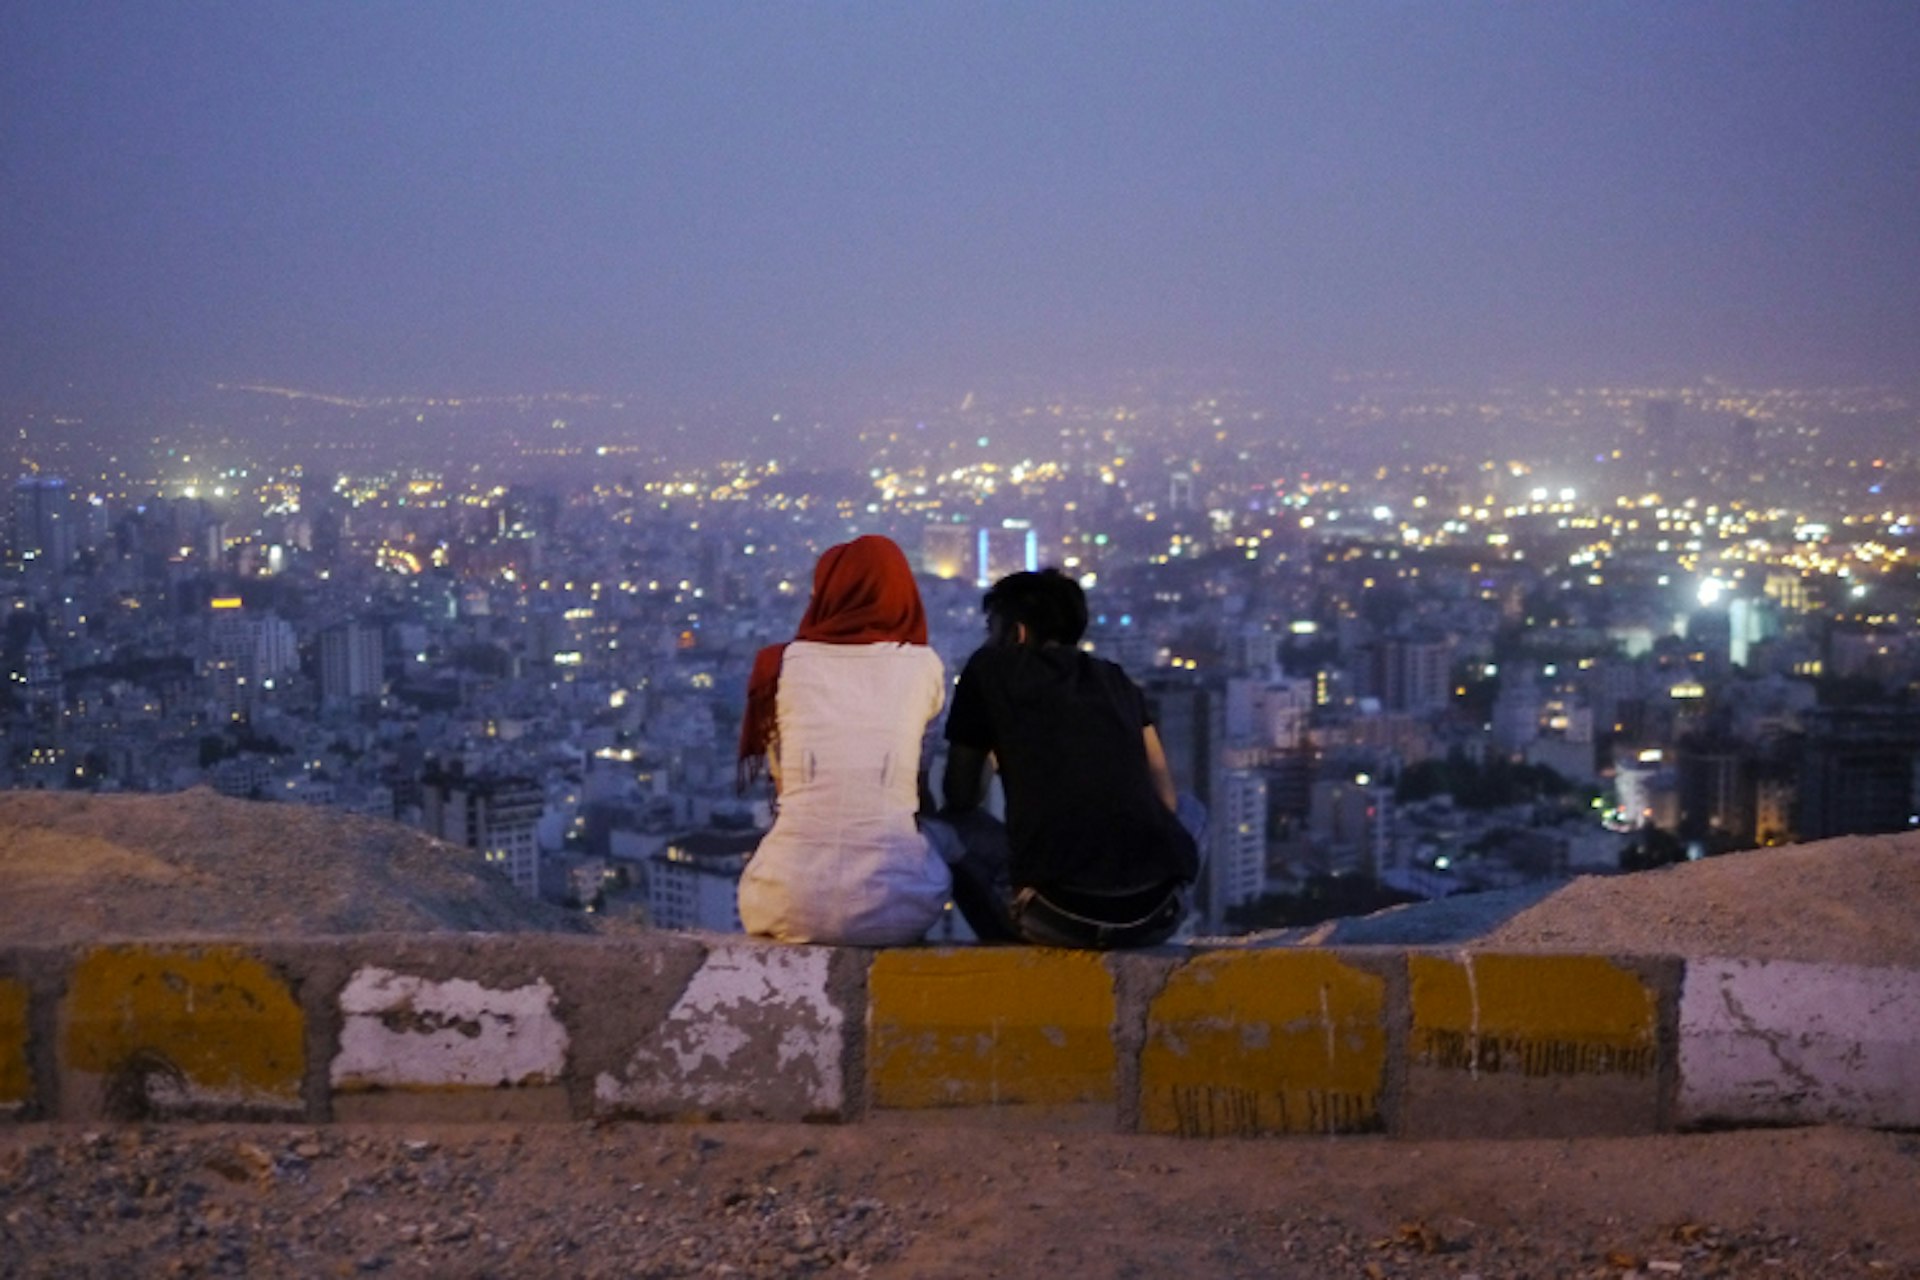 A young couple admire the view of Tehran at dusk. Image by Amos Chapple / Lonely Planet Images / Getty